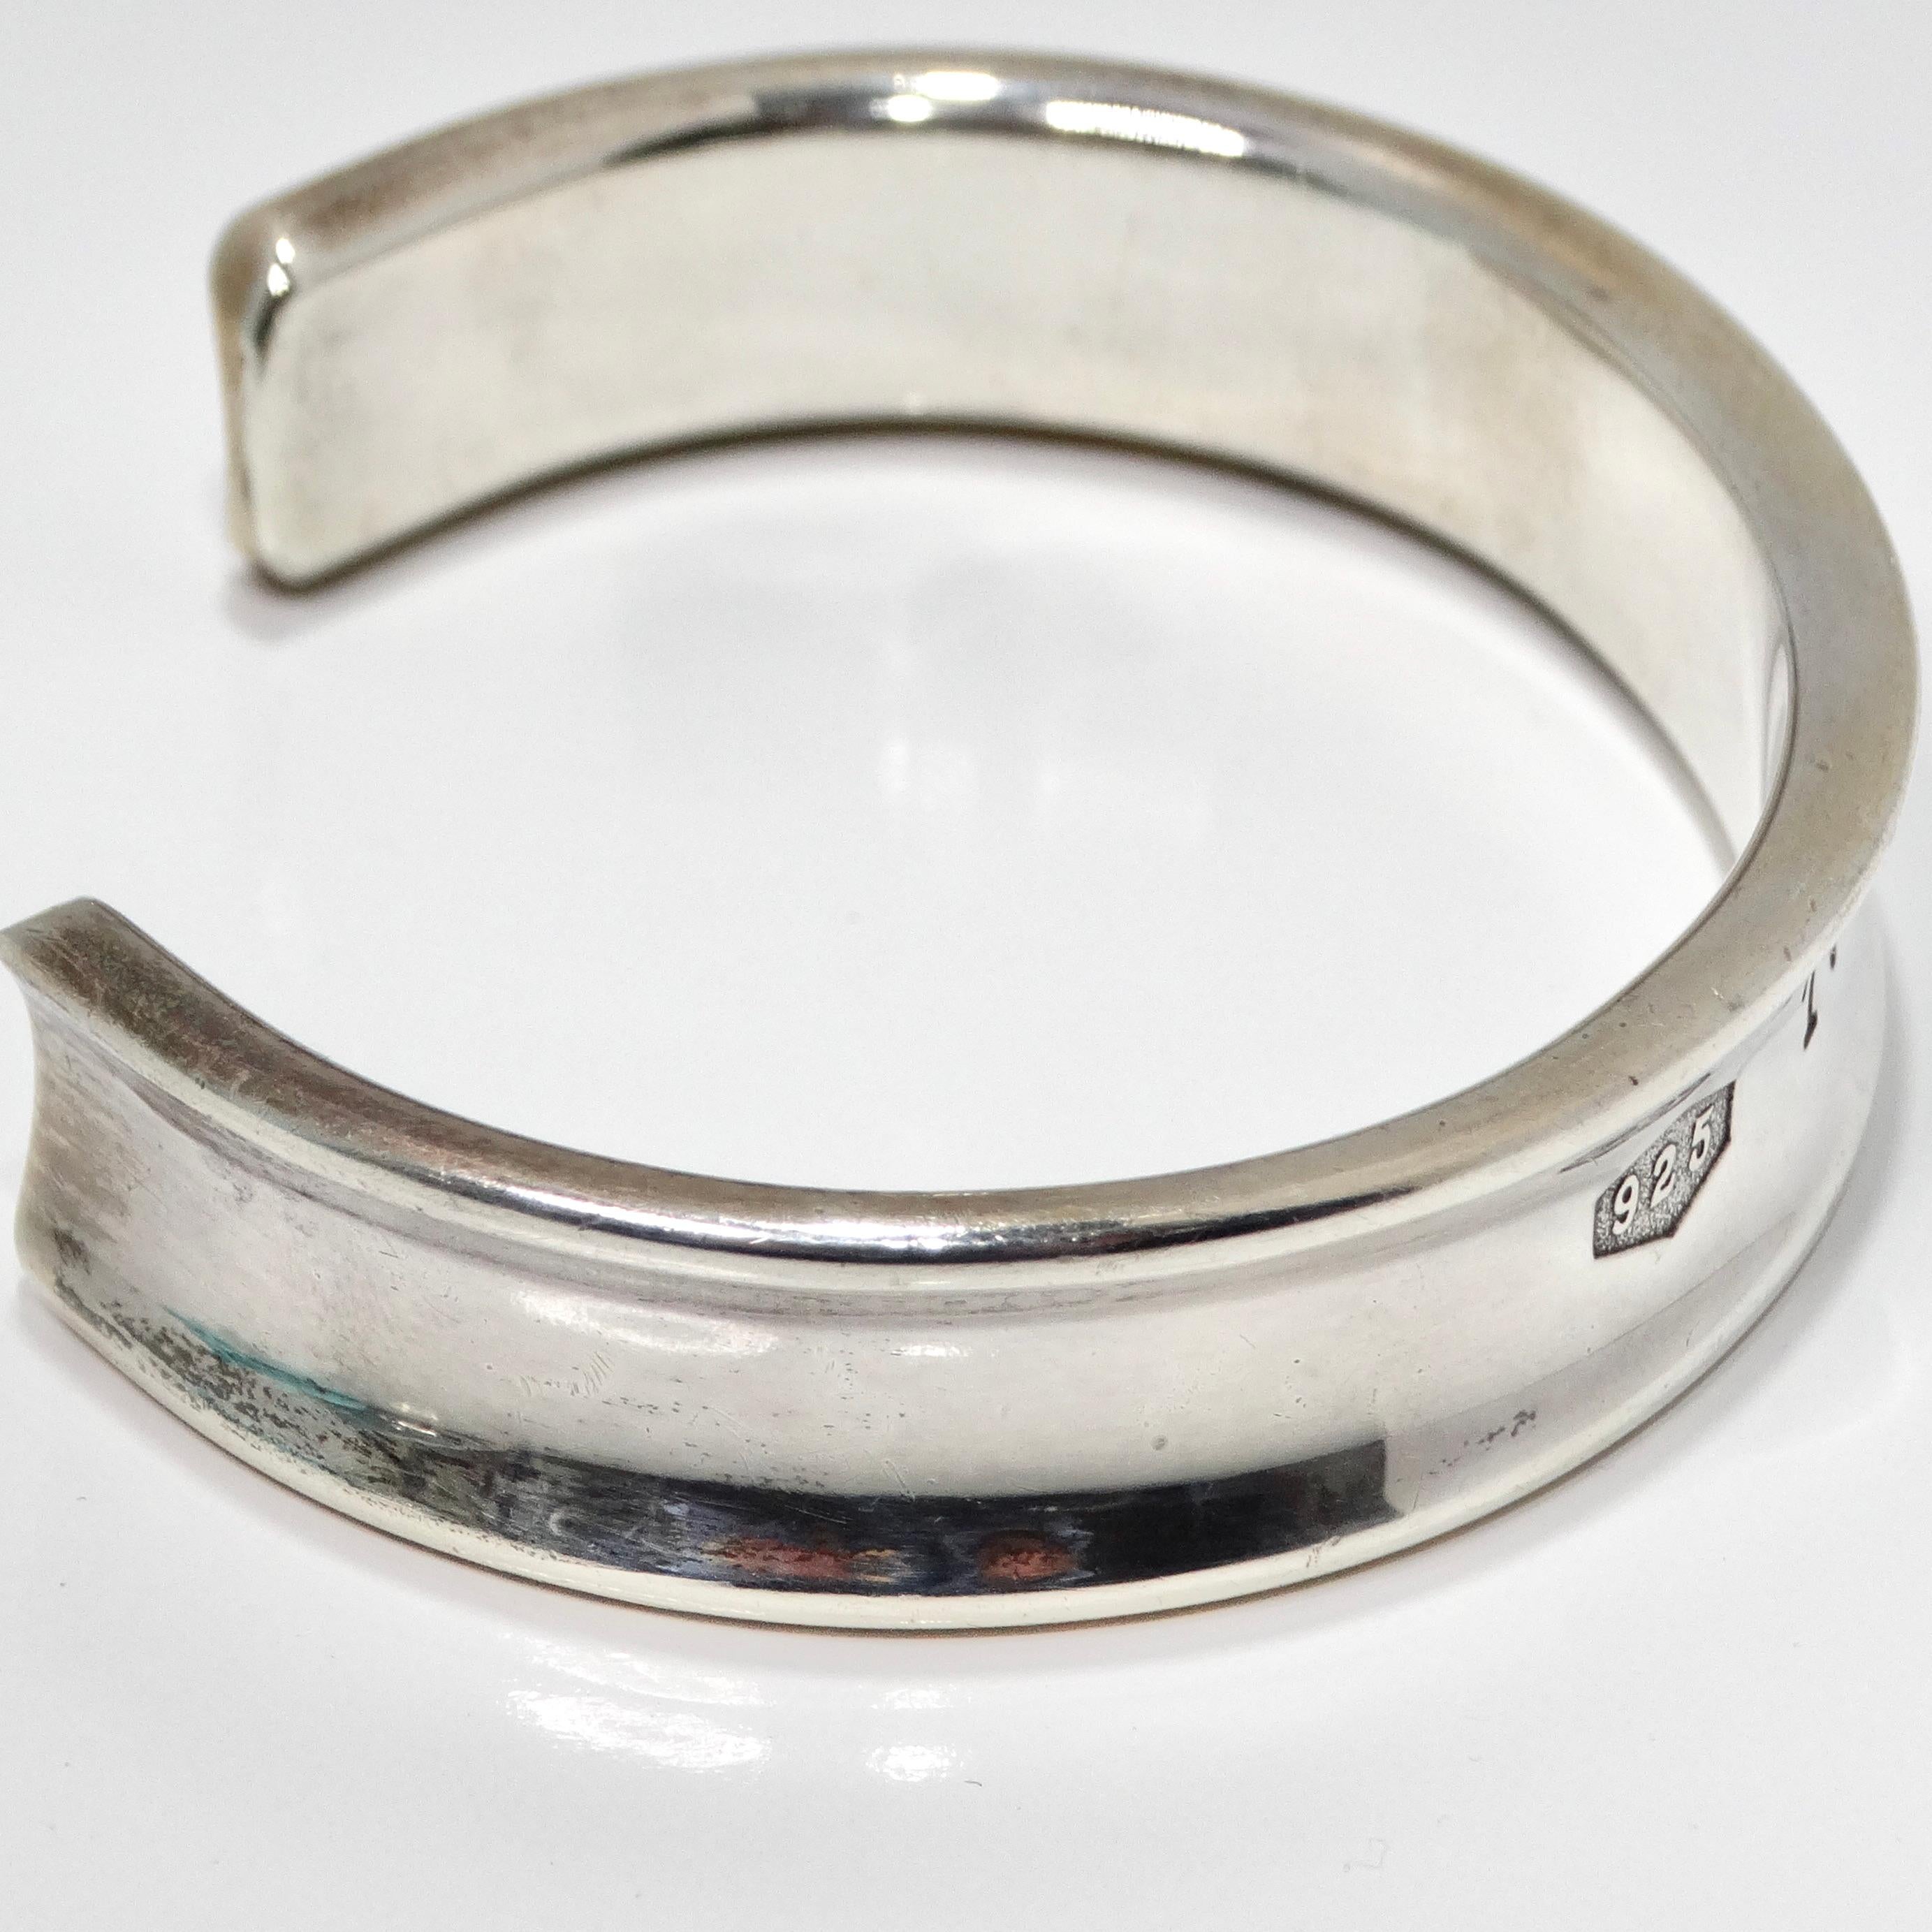 Tiffany & Co 1997 Silver 1925 Engraved Cuff Bracelet For Sale 1